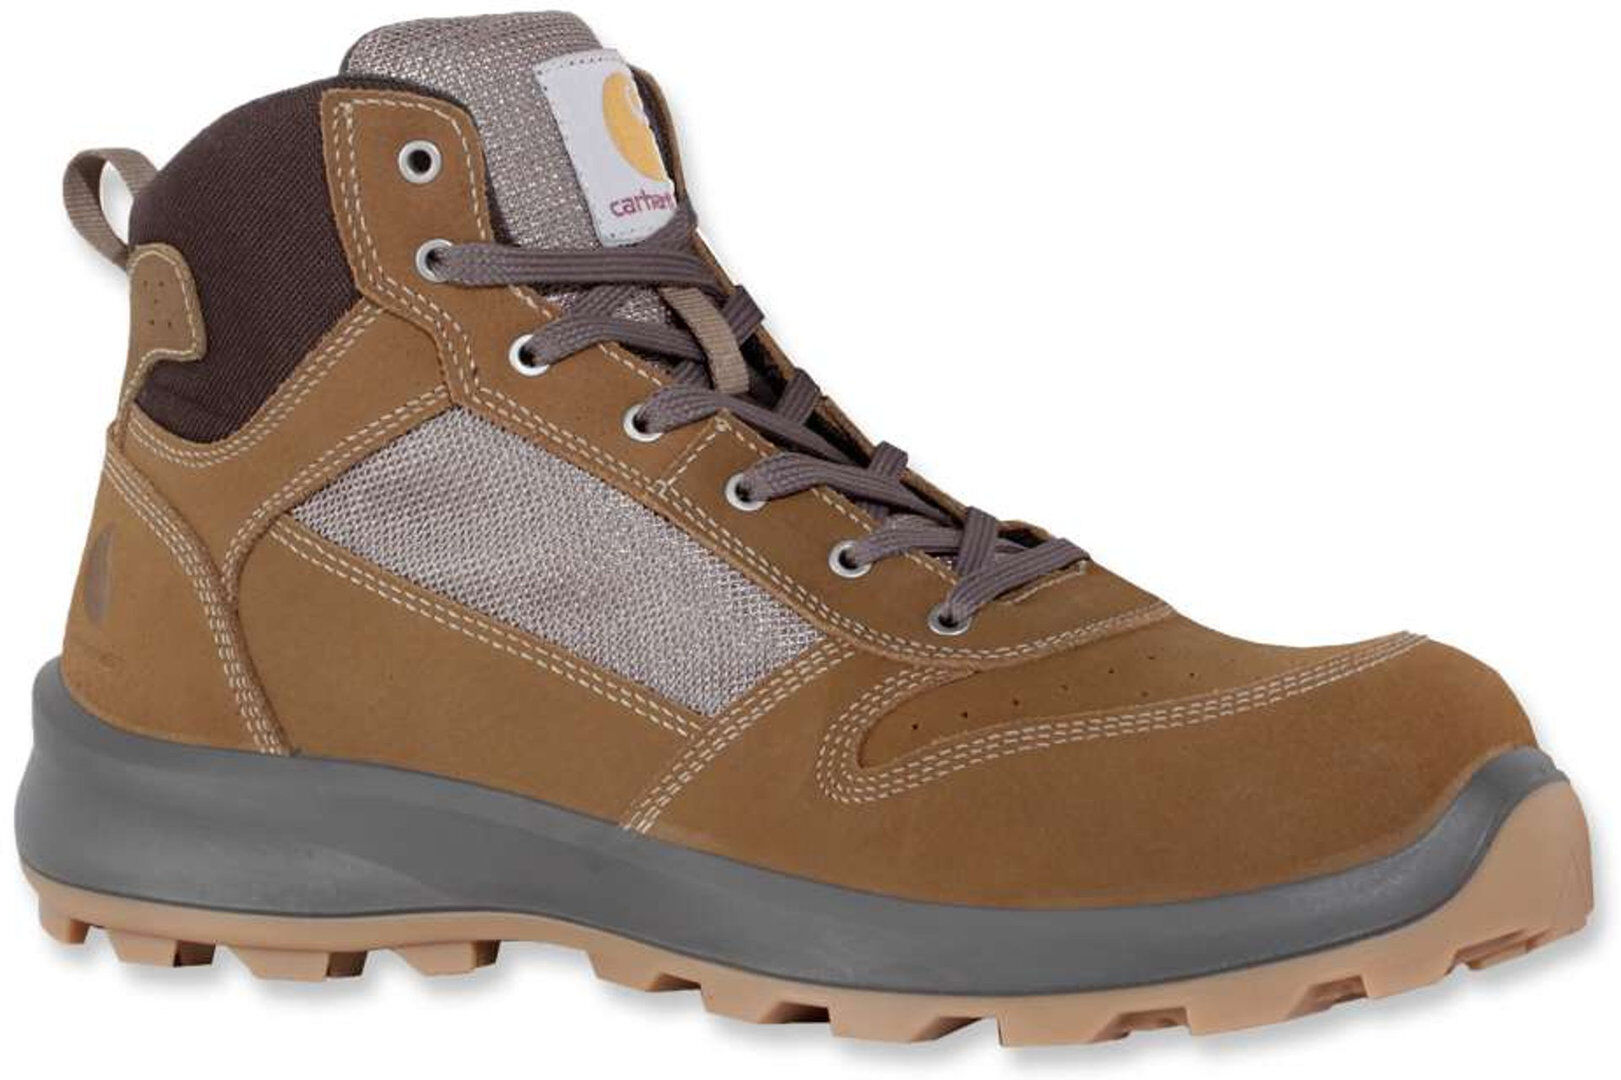 Carhartt Mid S1p Safety Boots  - Brown